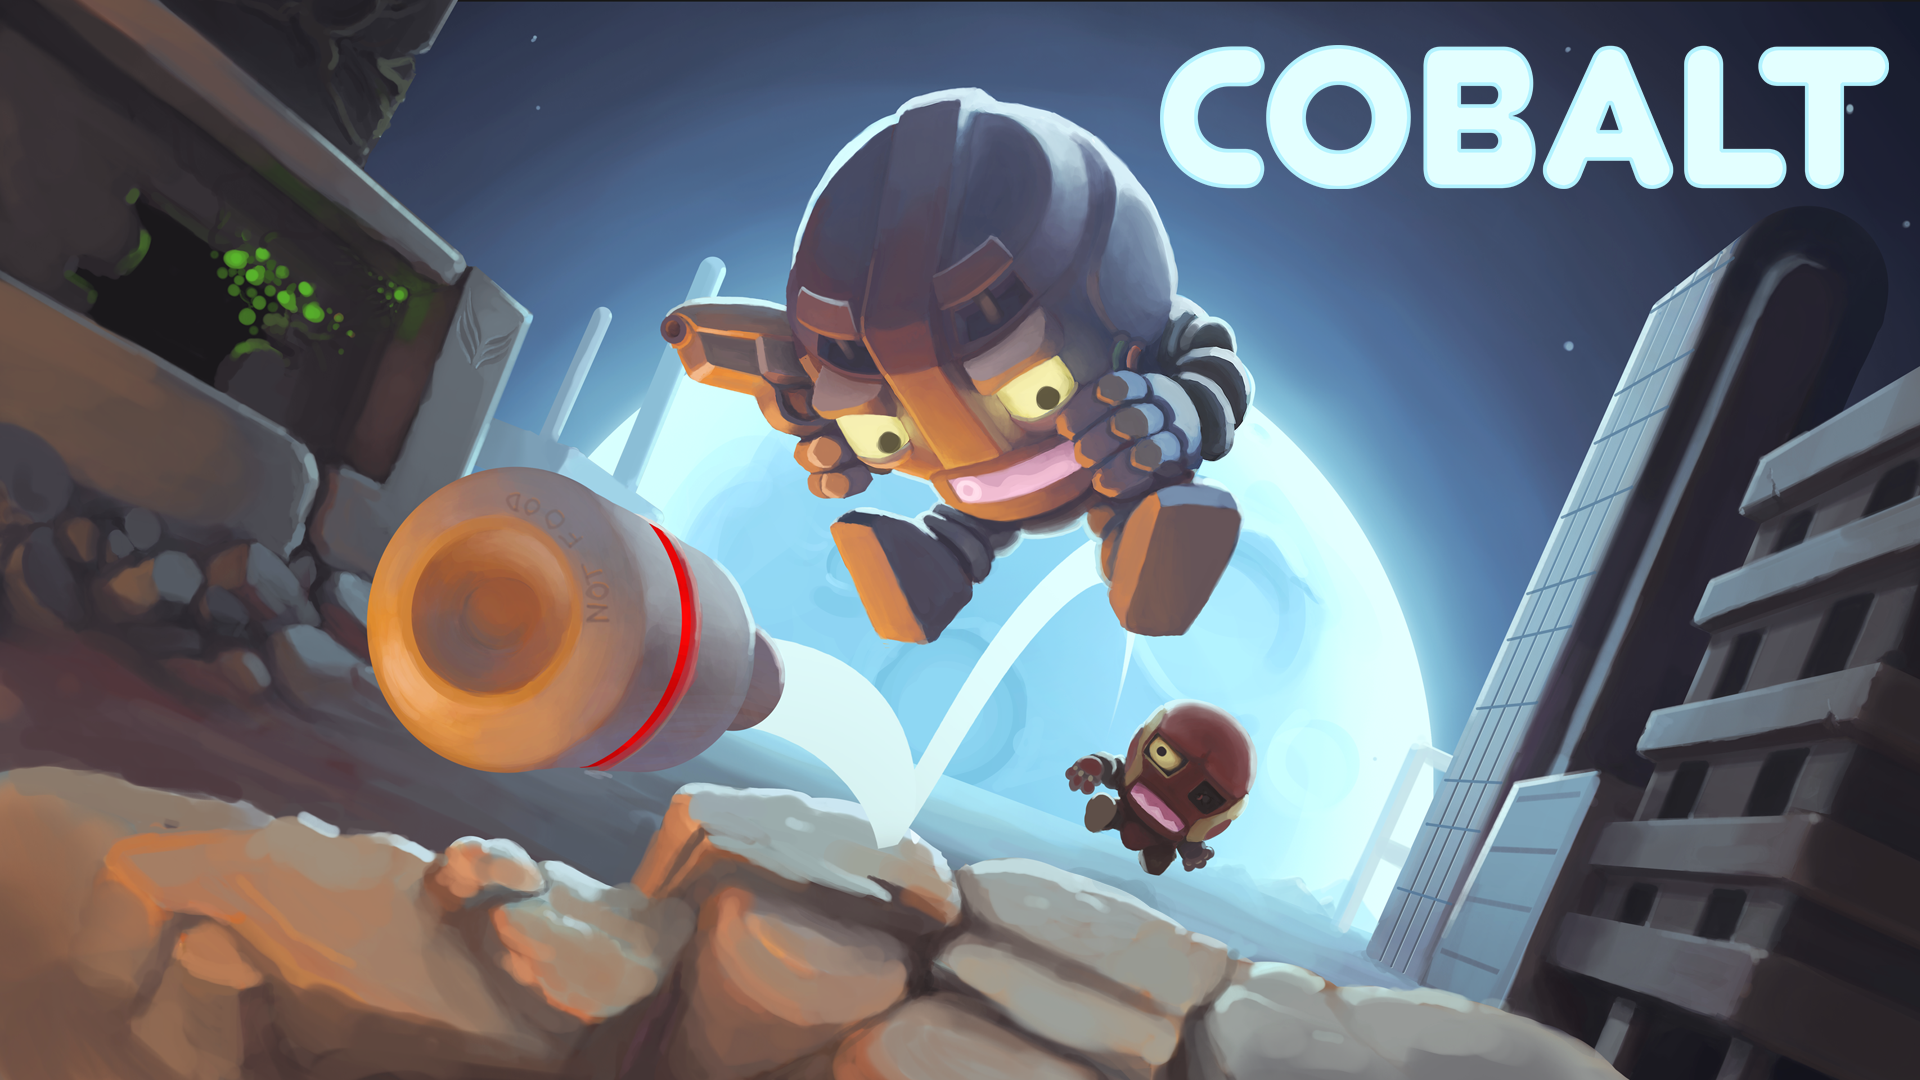 “Cobalt” Release Date Announced - Coming In Early February